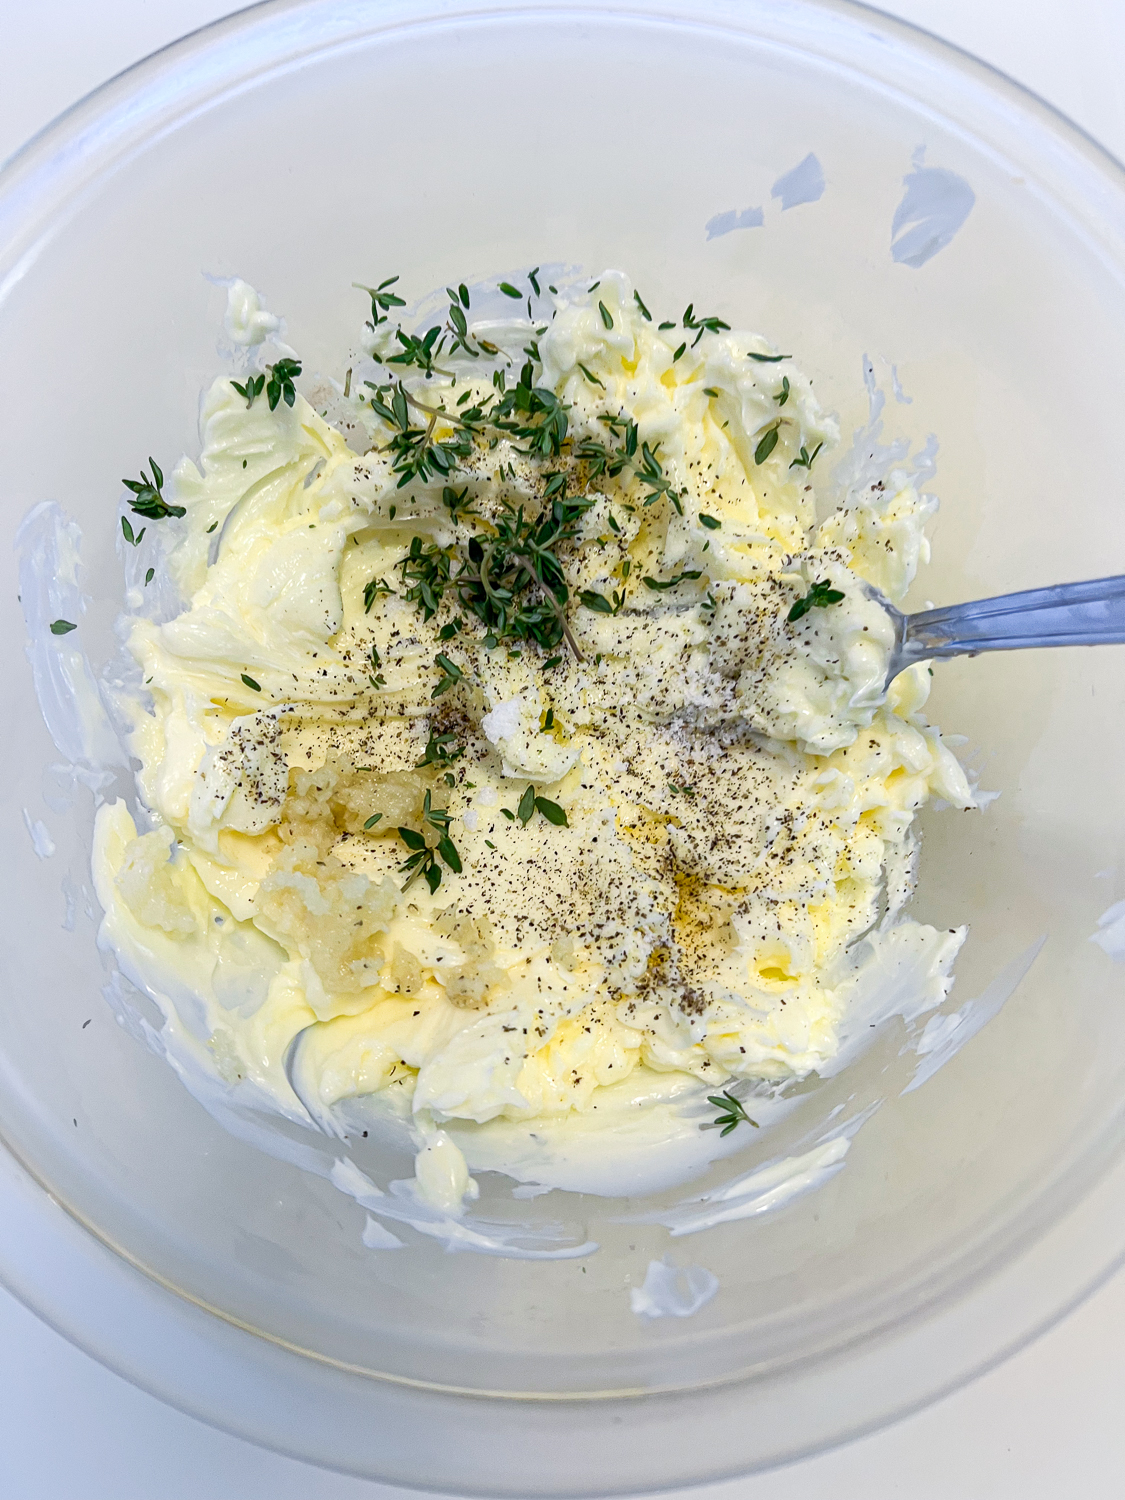 Herb butter being made: softened butter seasoned with salt, pepper, garlic, and fresh herbs ready to be mixed together.